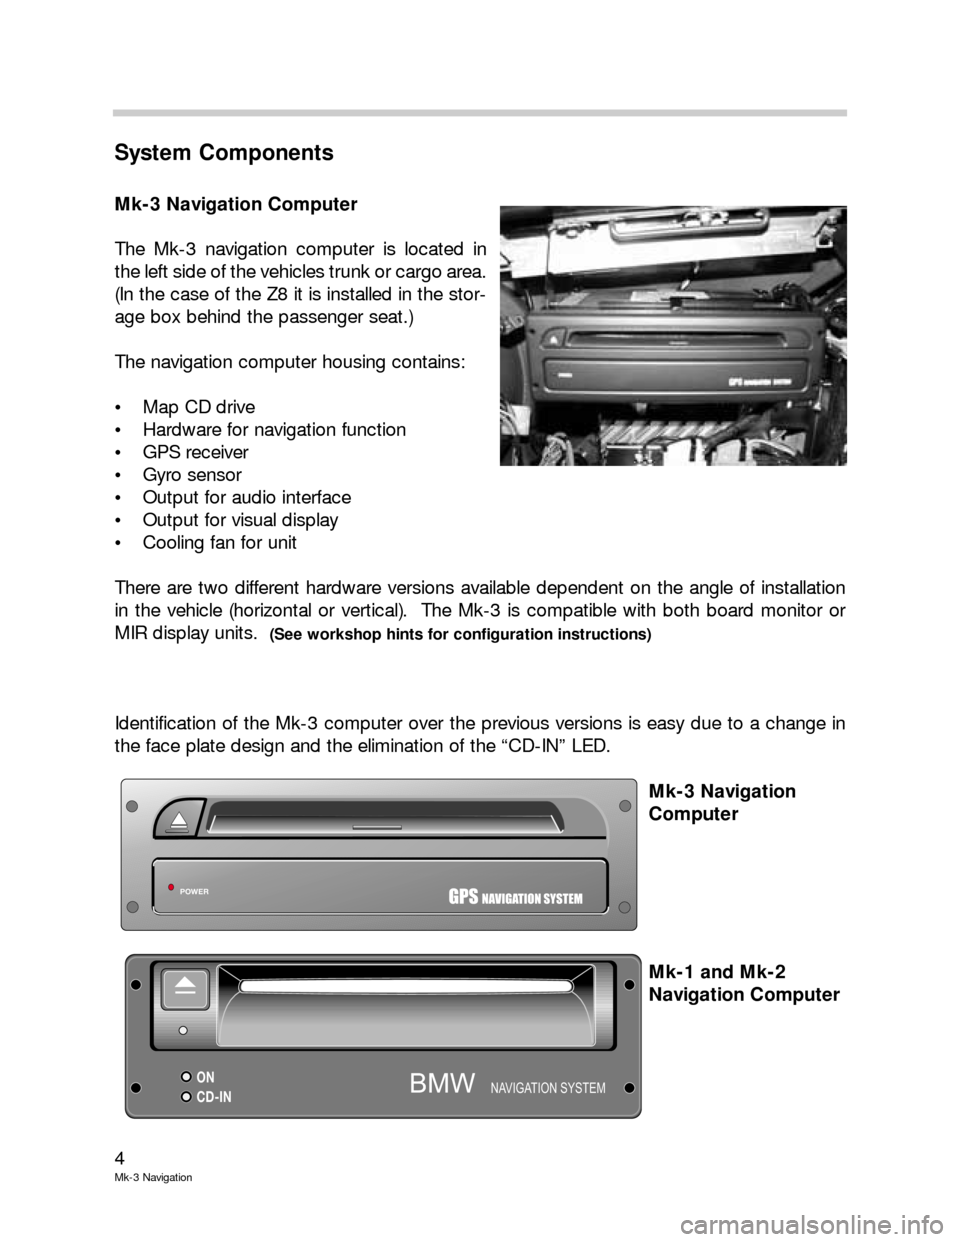 BMW X5 2003 E53 Mk3 Navigation System Manual 4
Mk-3 Navigation
System Components
Mk-3 Navigation Computer
The Mk-3 navigation computer is located in
the left side of the vehicles trunk or cargo area.
(In the case of the Z8 it is installed in the